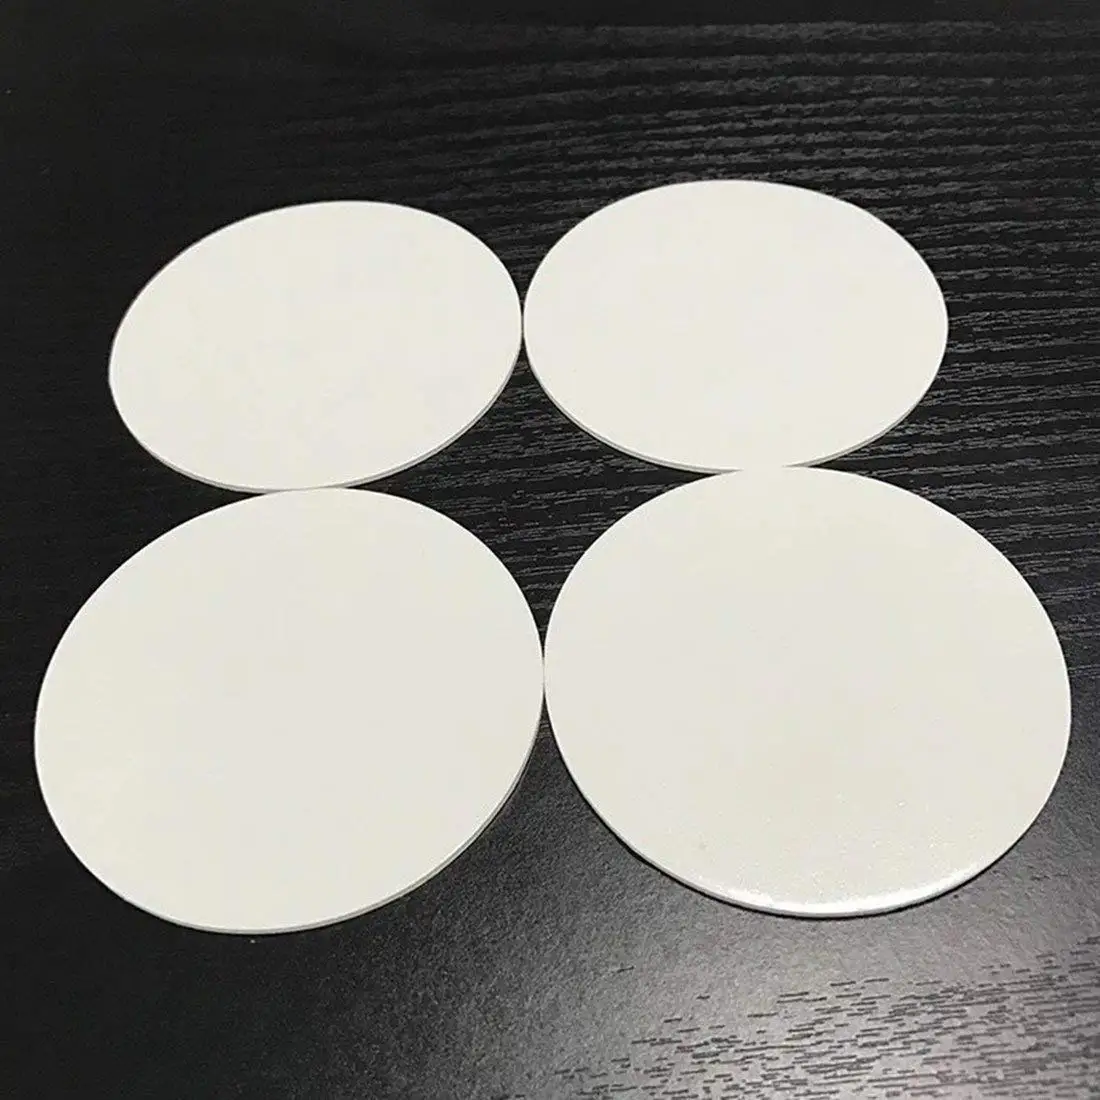 double sided adhesive pads